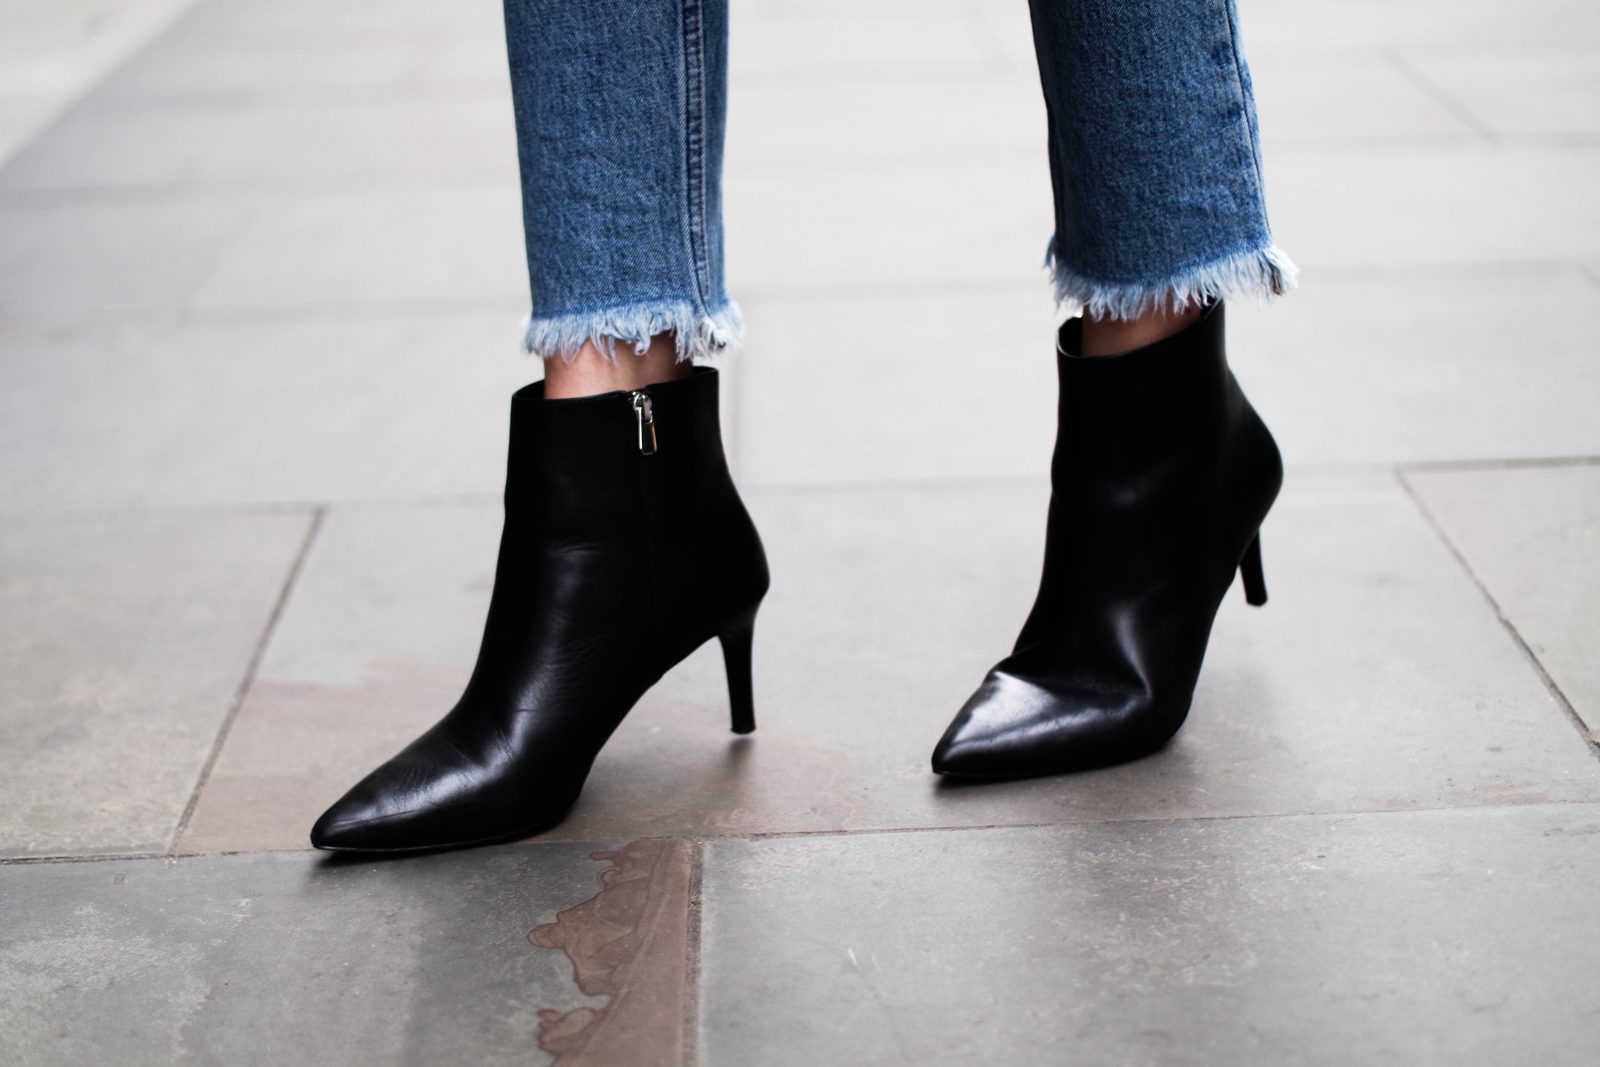 LFW Day 4 Comfy & Casual - Stories Boots